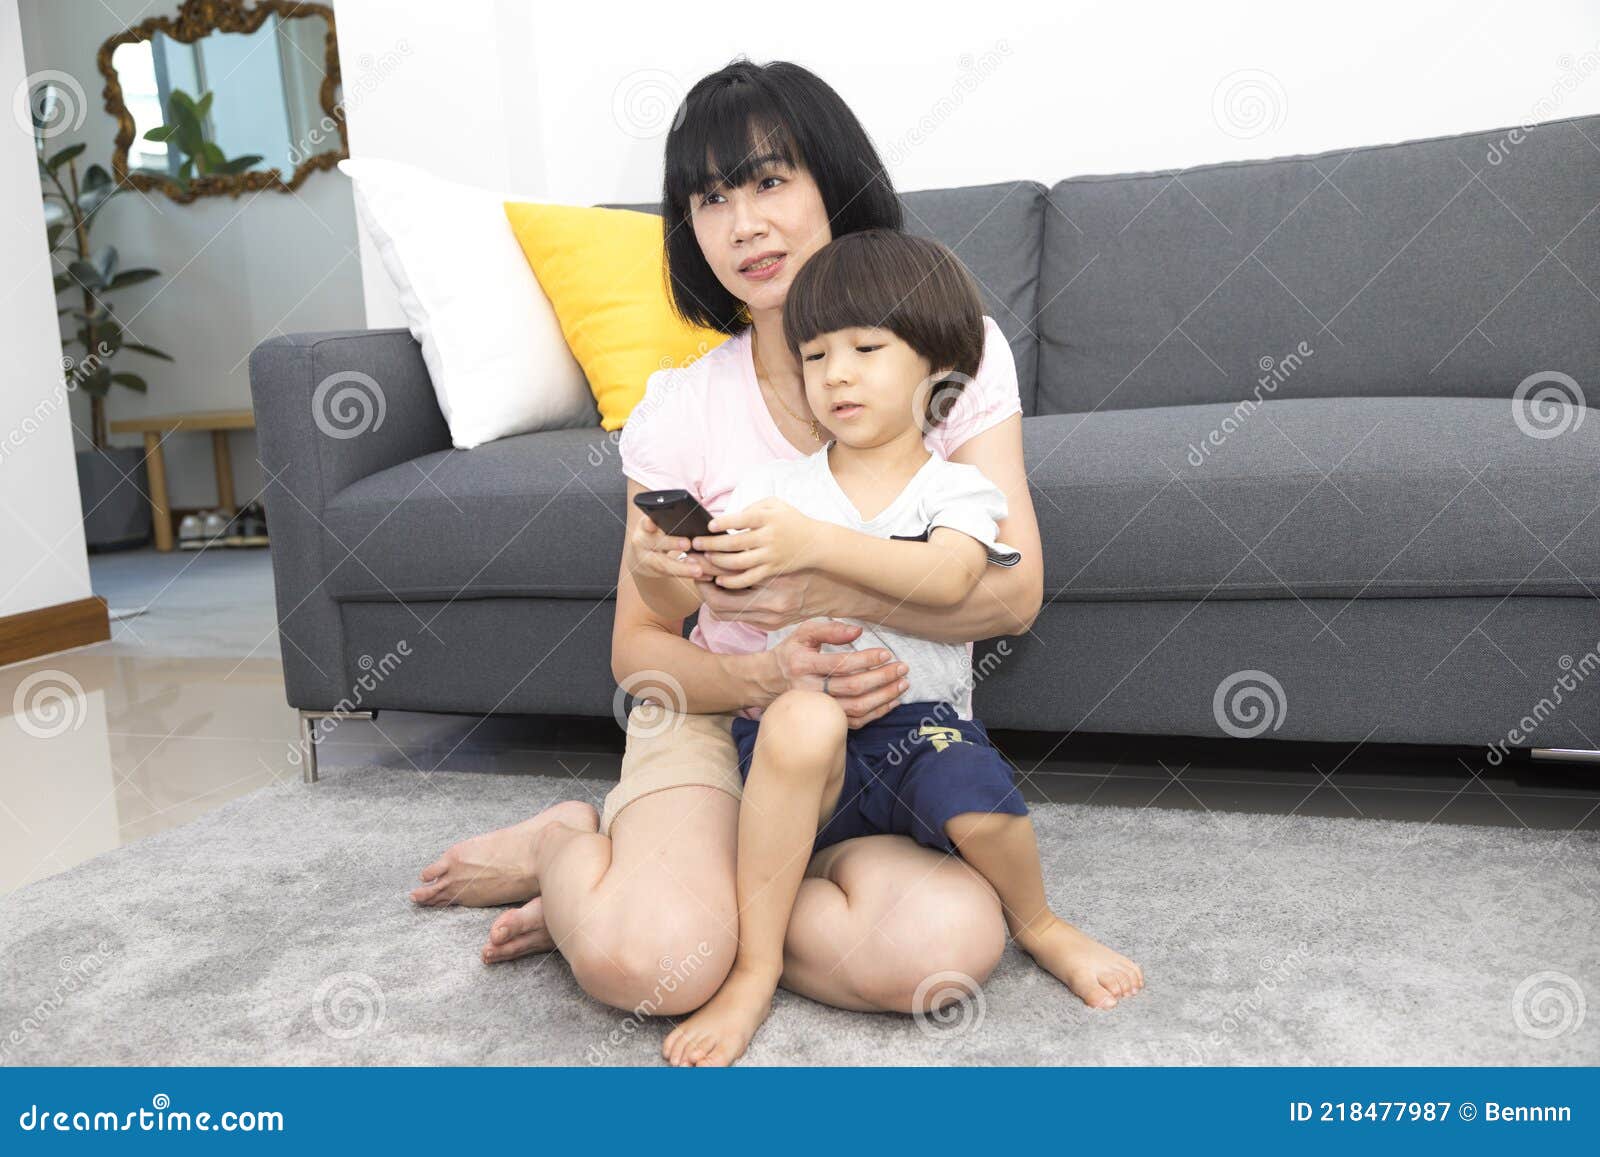 Asian Mom And Son Couple Watching Tv On A Sofa At Home Stock Image Image Of Father Choice